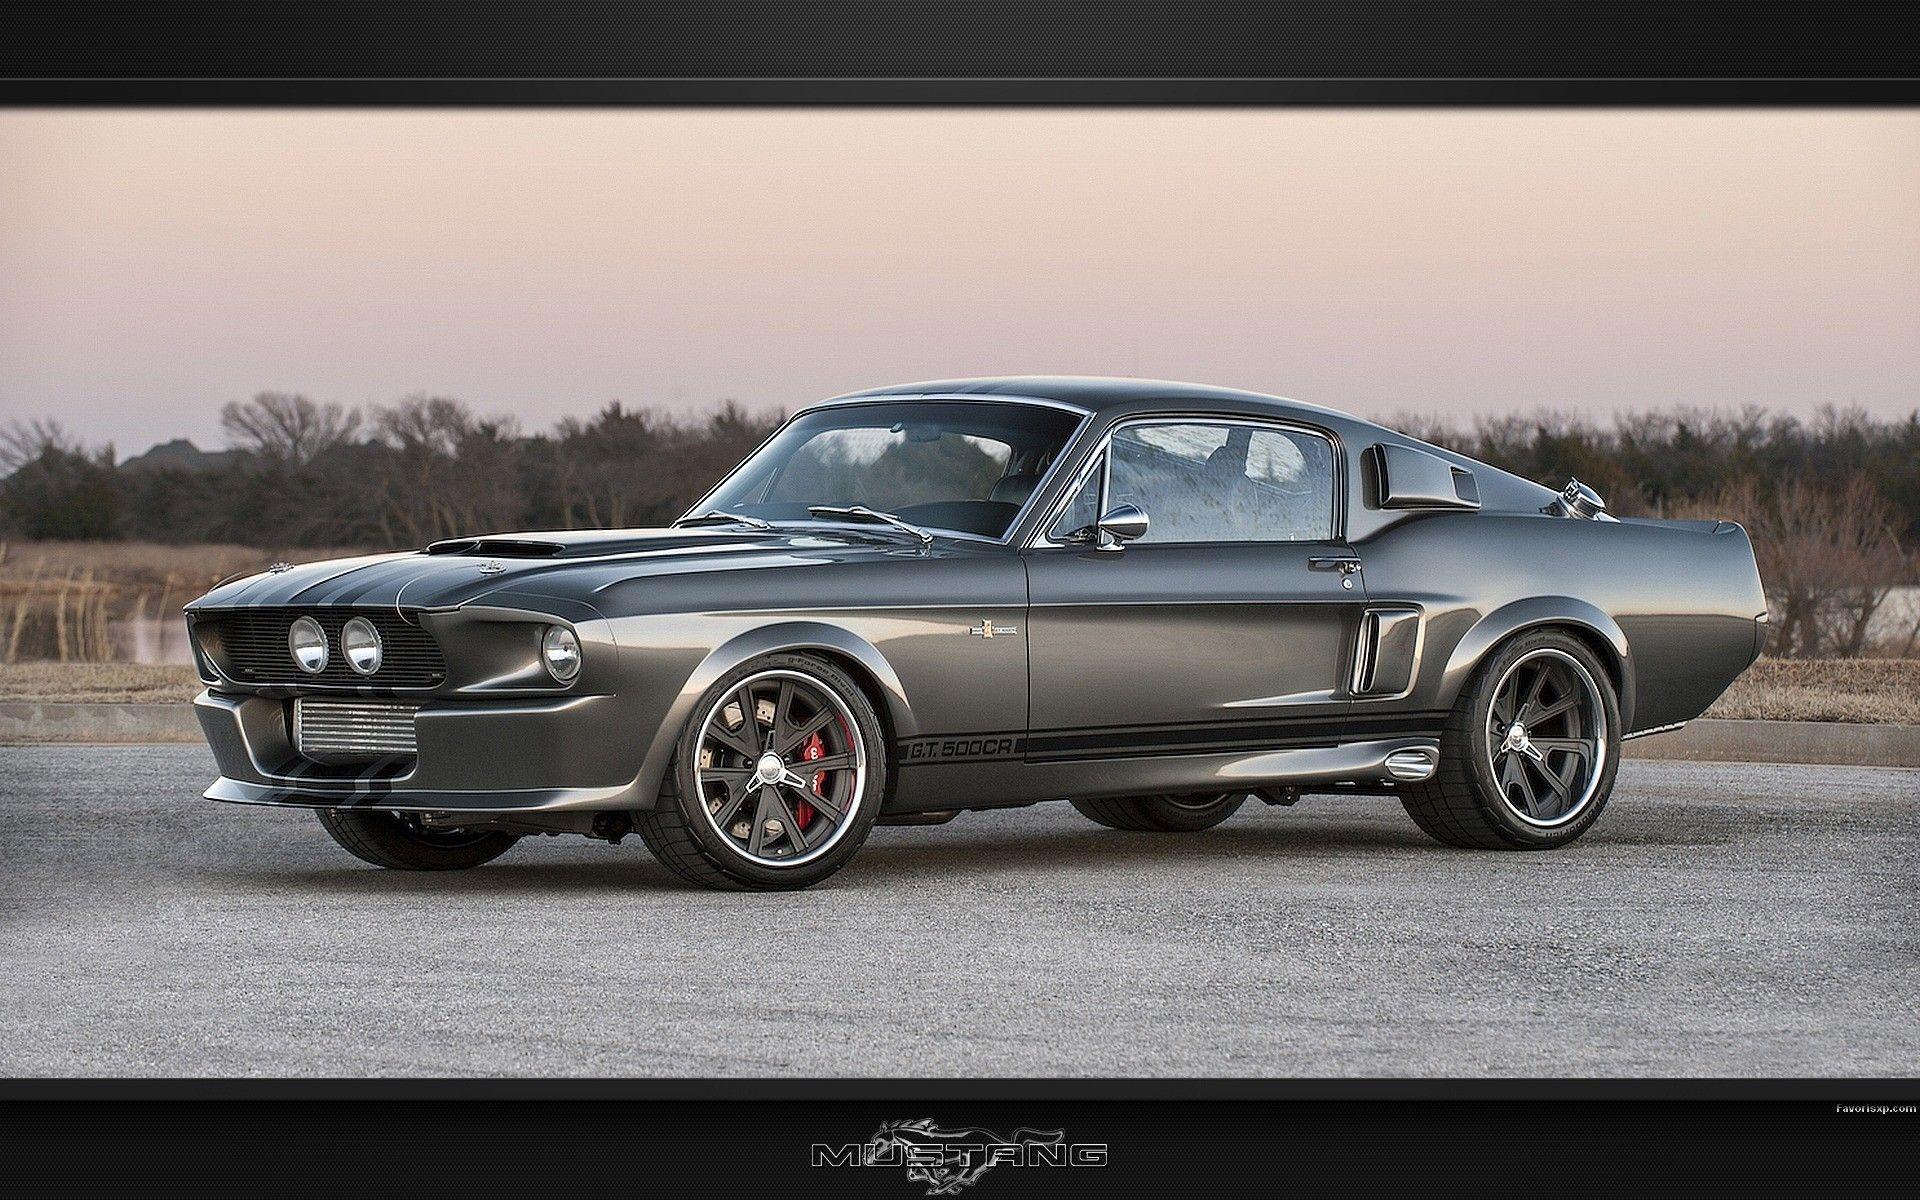 Ford Mustang Shelby Gt500 Eleanor 1967 Wallpaper Hd - carrotapp